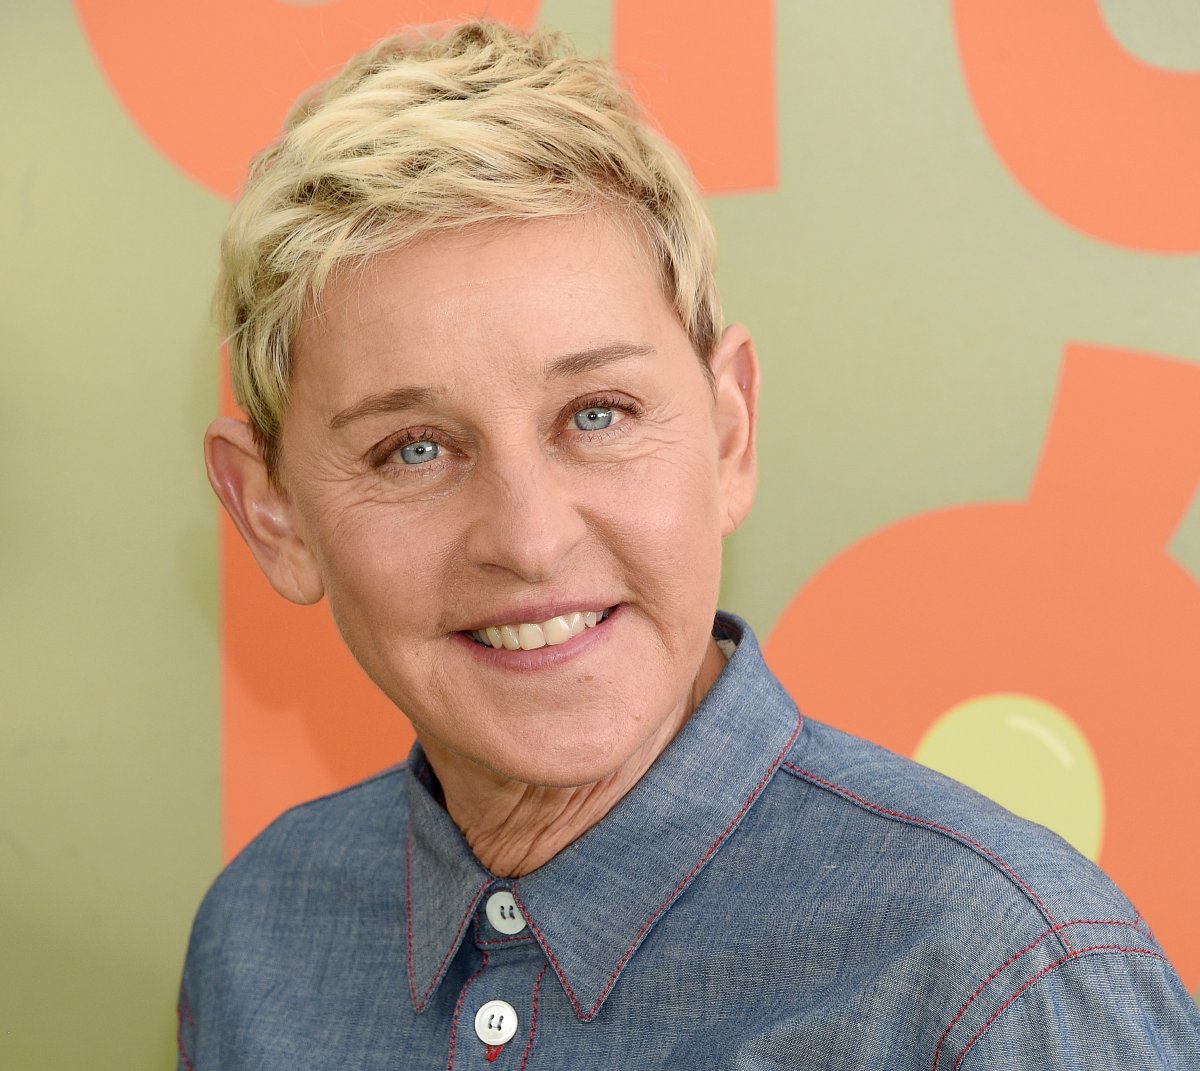 Ellen DeGeneres arrives at the Premiere of Netflix's "Green Eggs And Ham" at Hollywood American Legion on November 3, 2019 in Los Angeles, Calif.